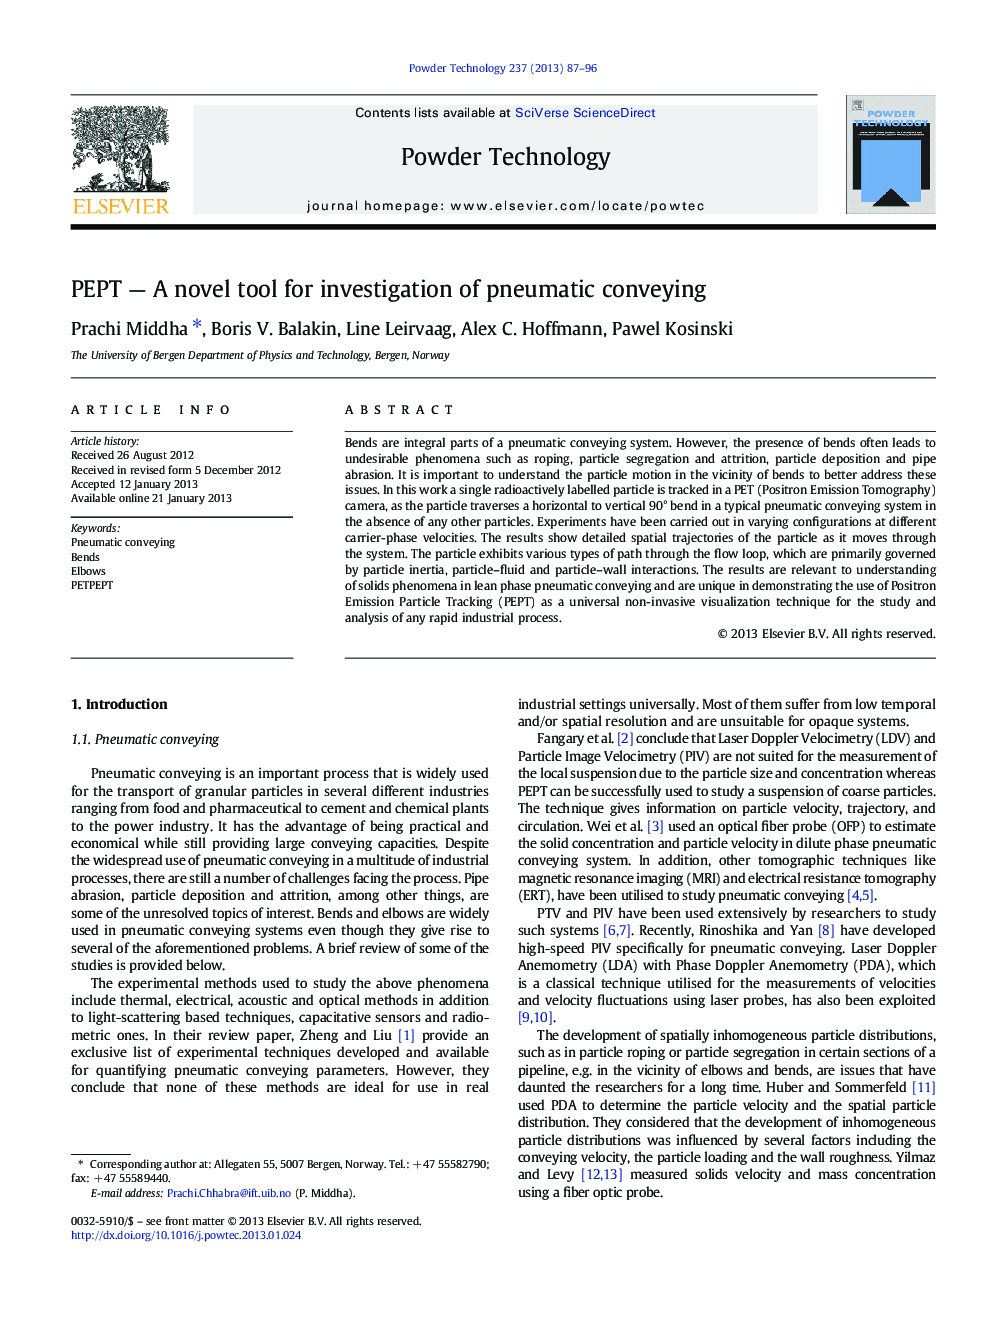 PEPT — A novel tool for investigation of pneumatic conveying